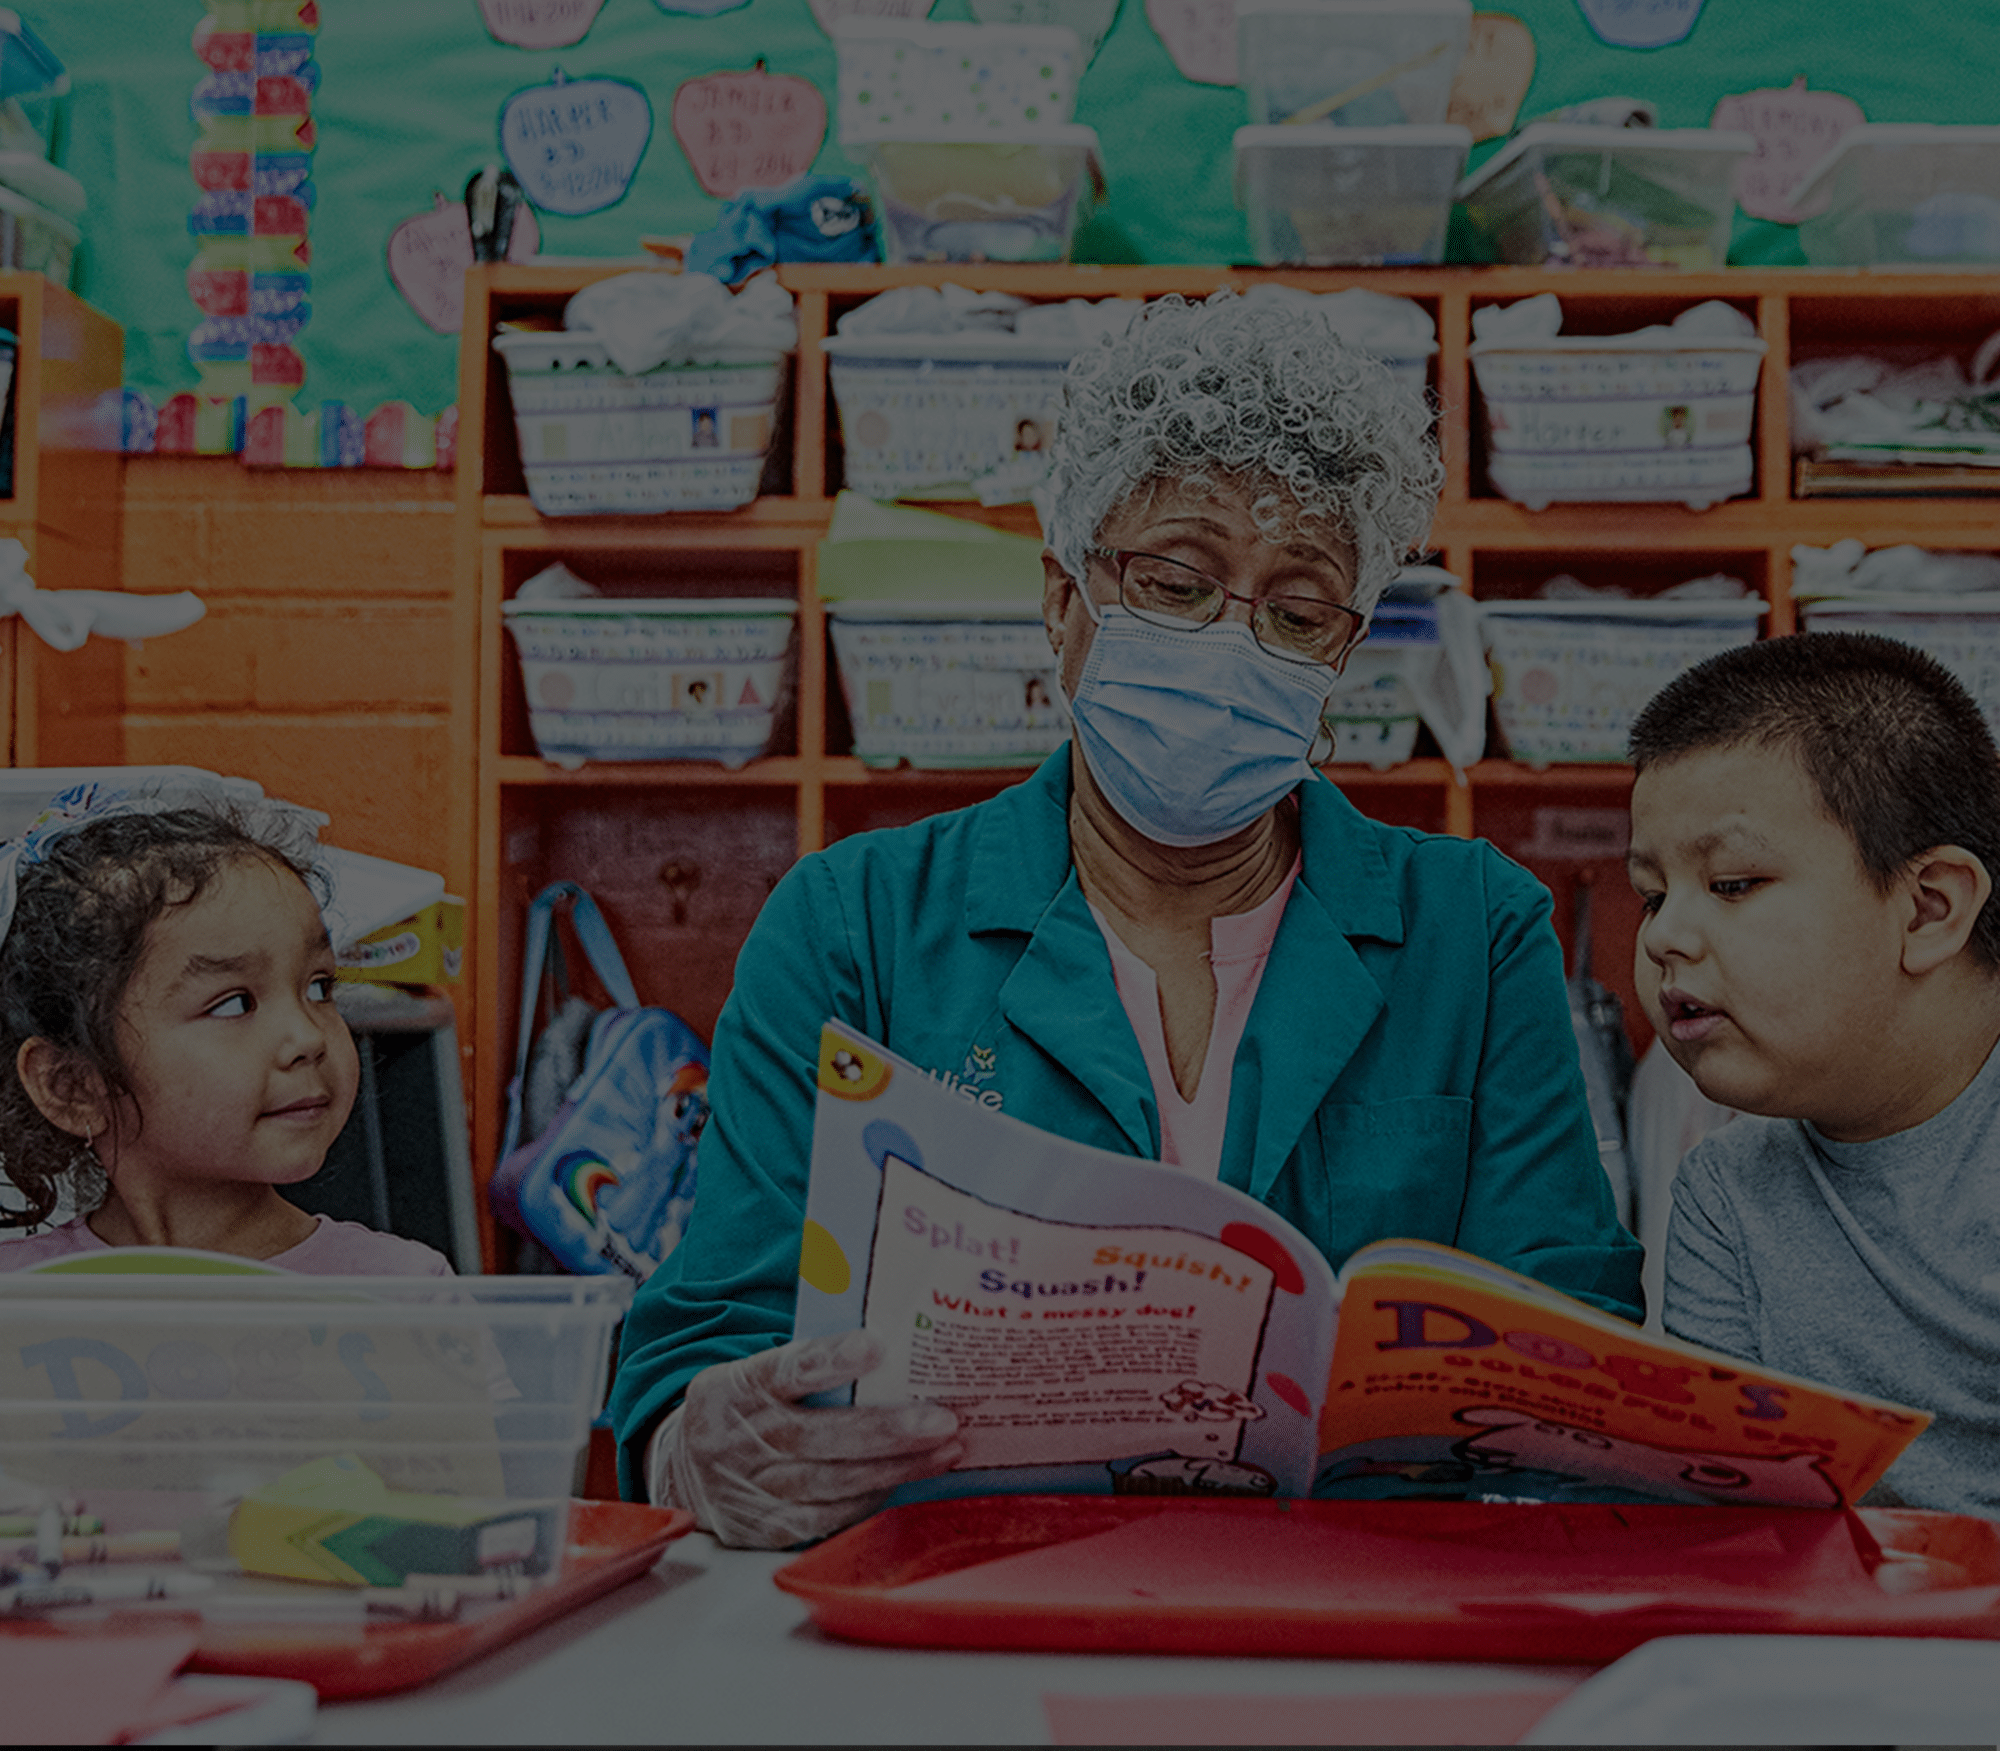 United Way is committed to diversity, equity and inclusion. This image shows an older woman reading to two children.